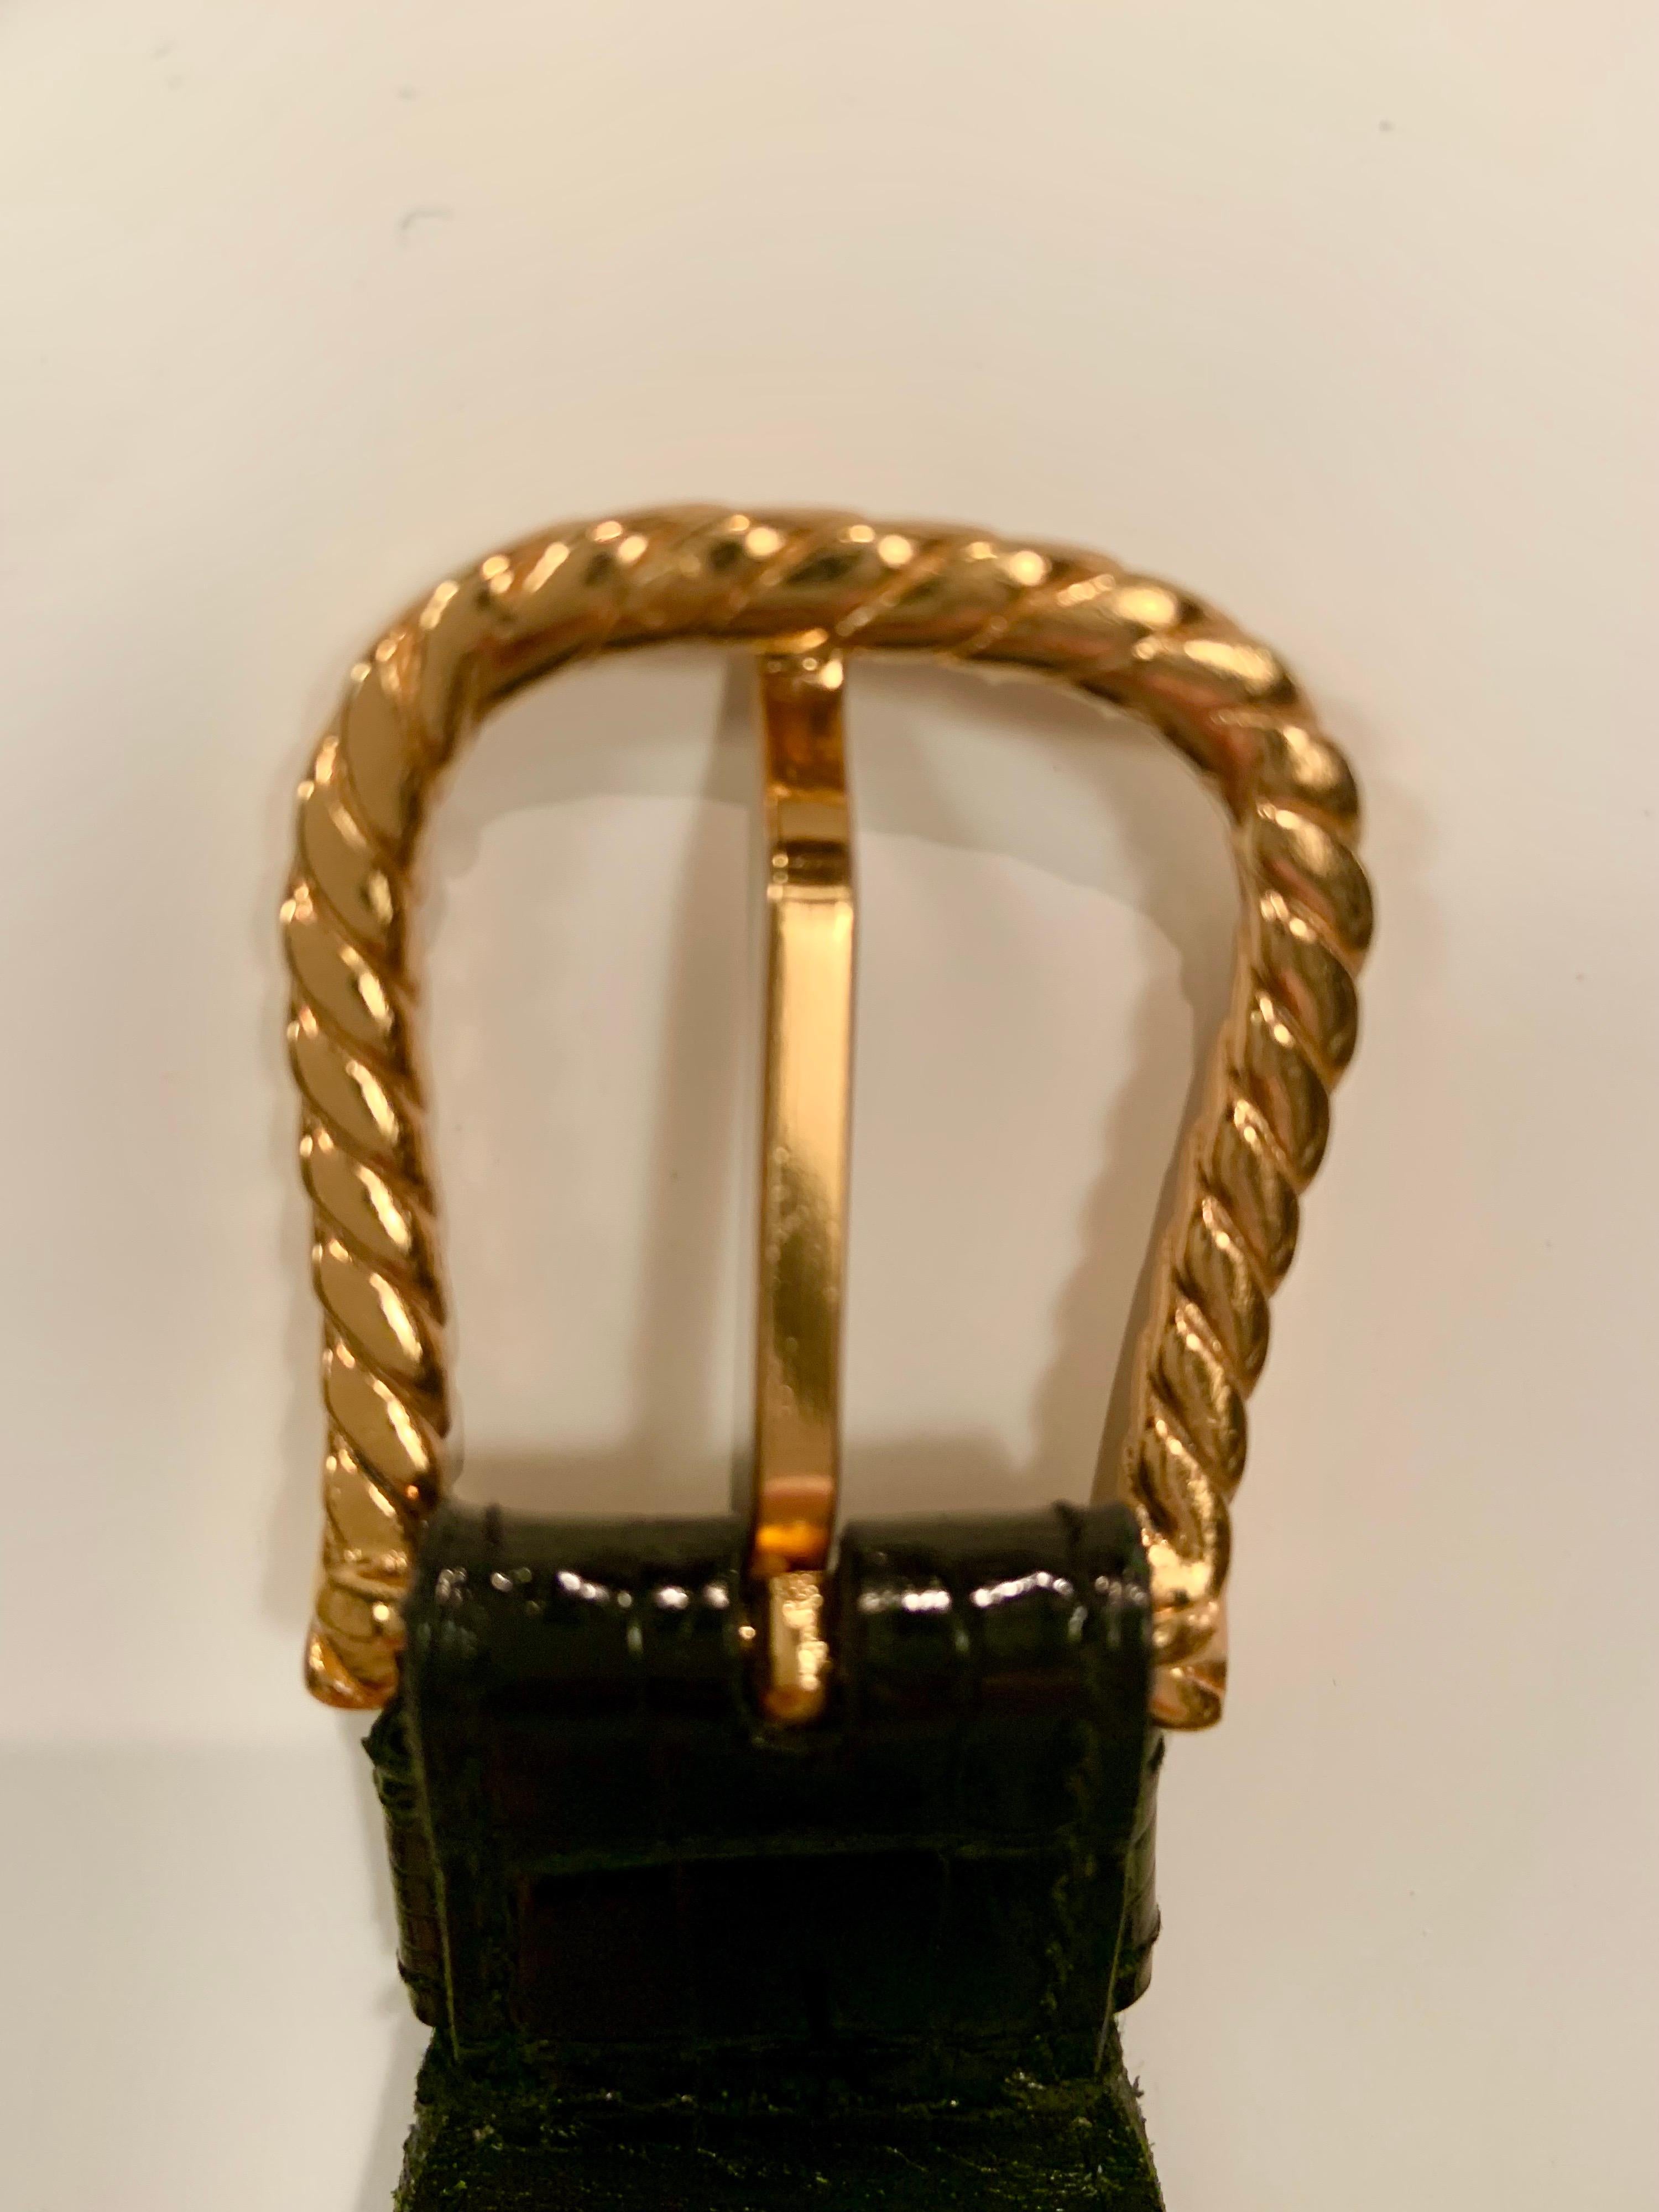 Gucci Vintage Black Alligator Belt Gold Toned Rope Twist Buckle  In Excellent Condition For Sale In New Hope, PA